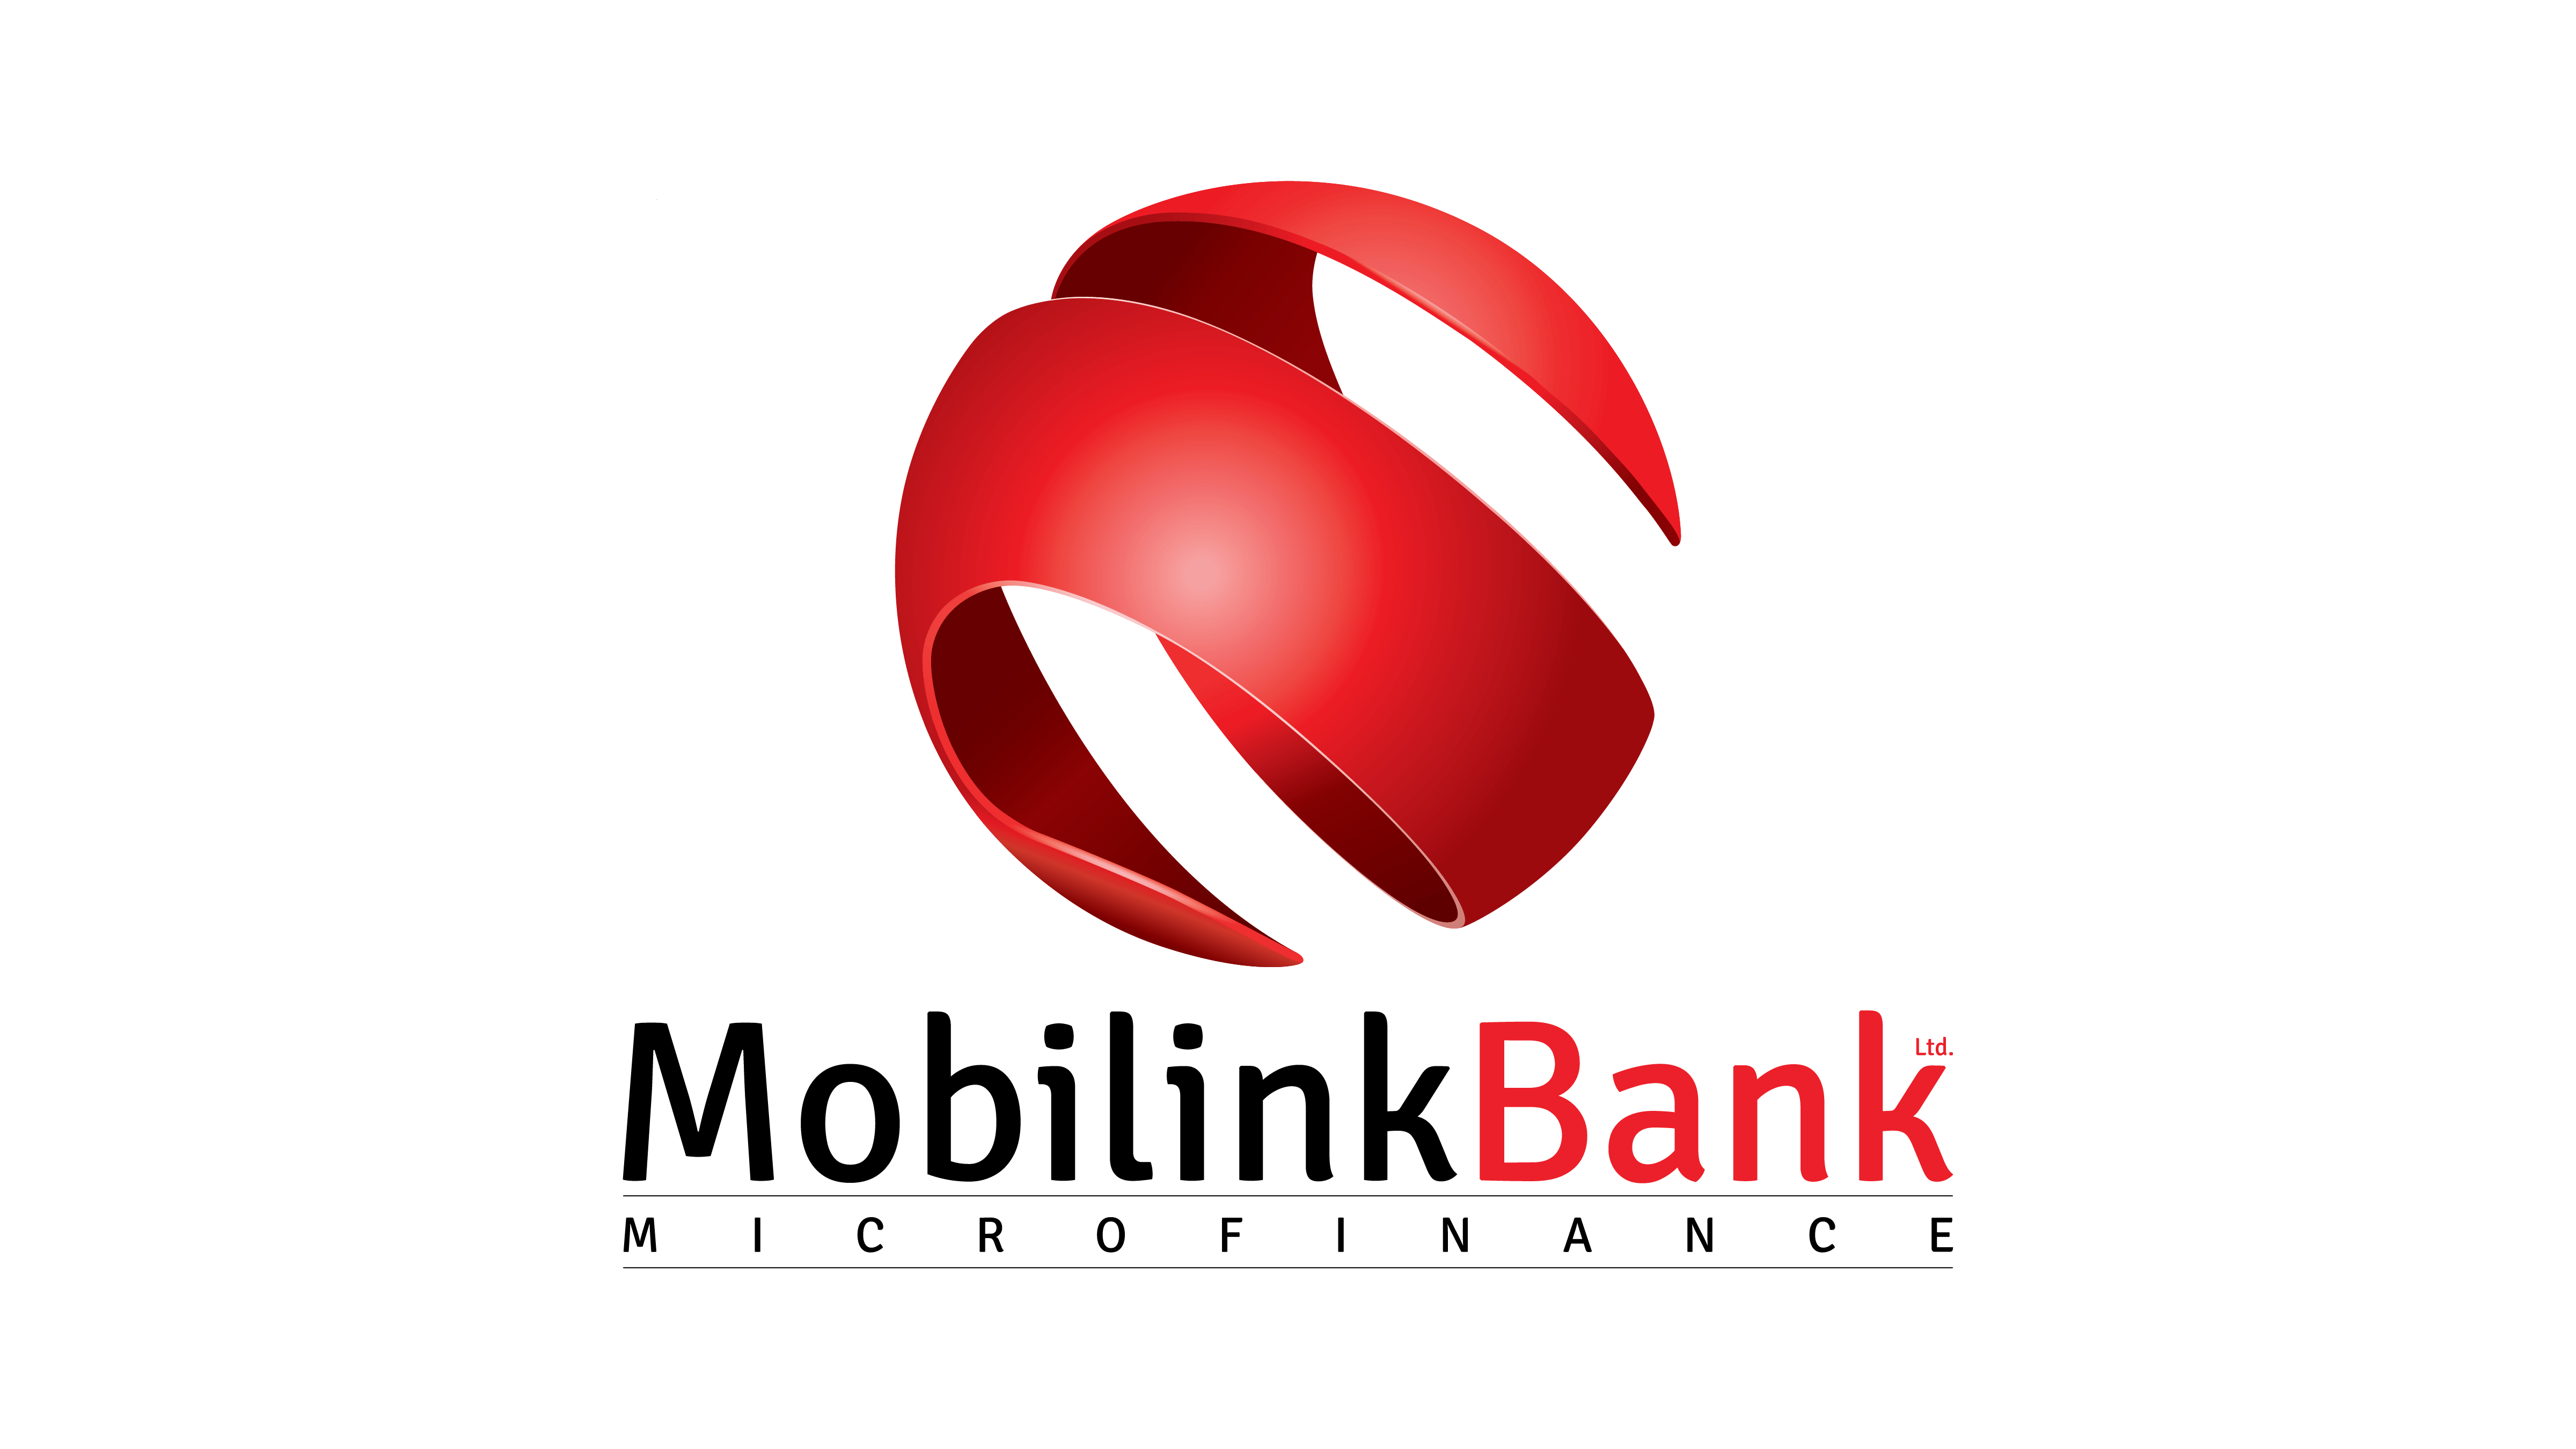 Mobilink Bank Achieves 72% Revenue Growth, Prioritizing Inclusive Banking for Women and SMEs